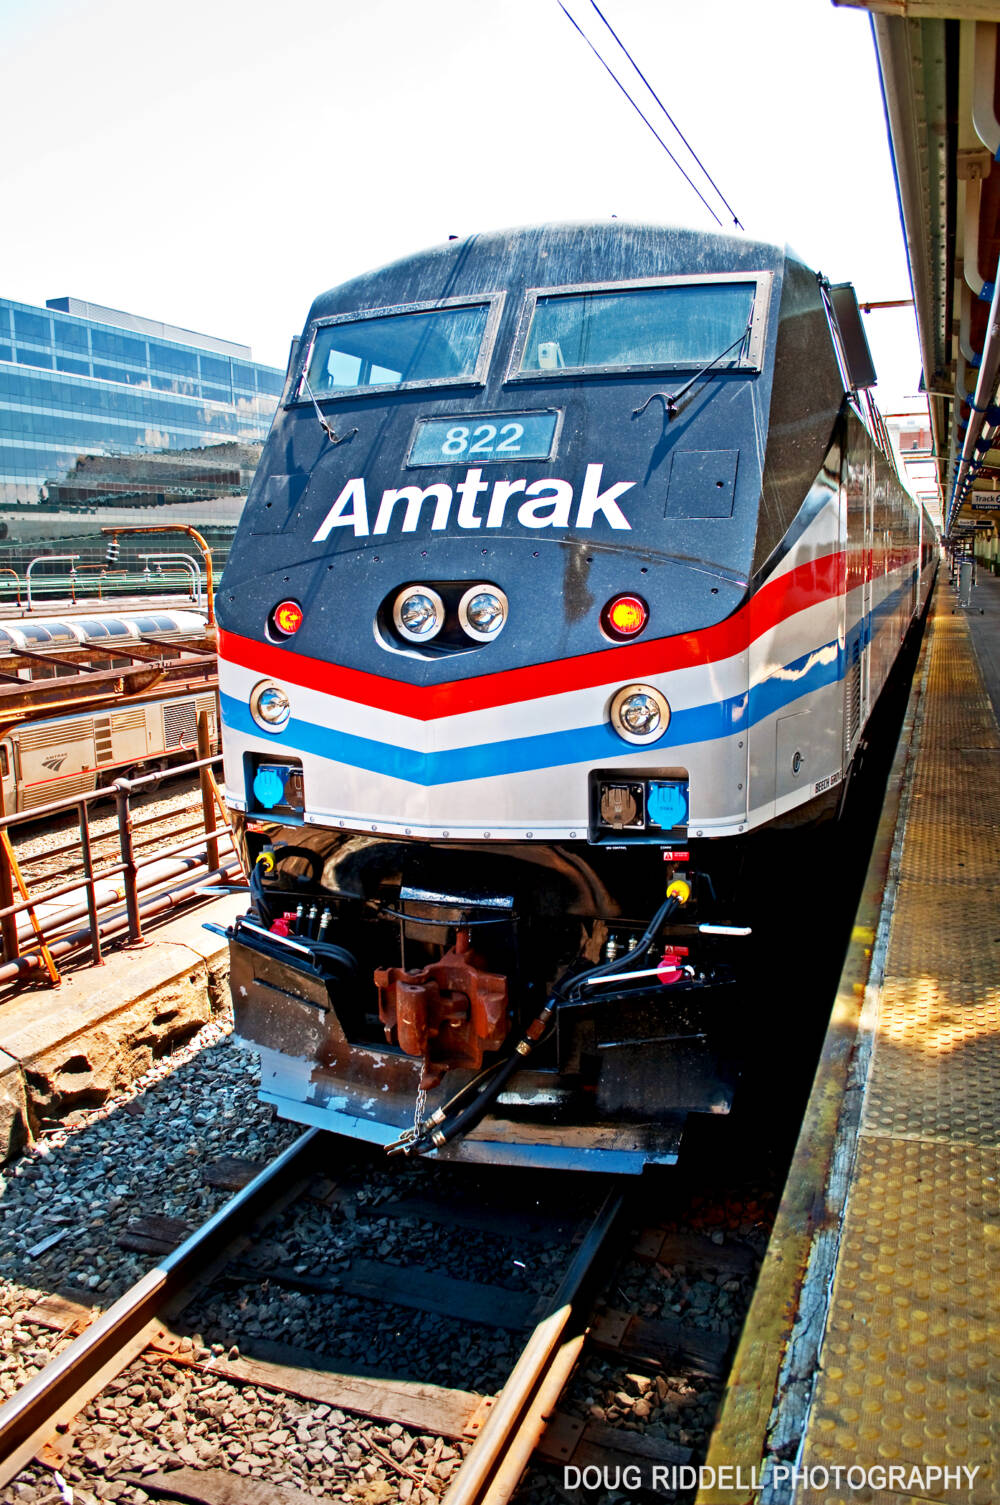 A modern passenger diesel painted silver, with a black nose and red, white and blue stripes at a passenger station platform